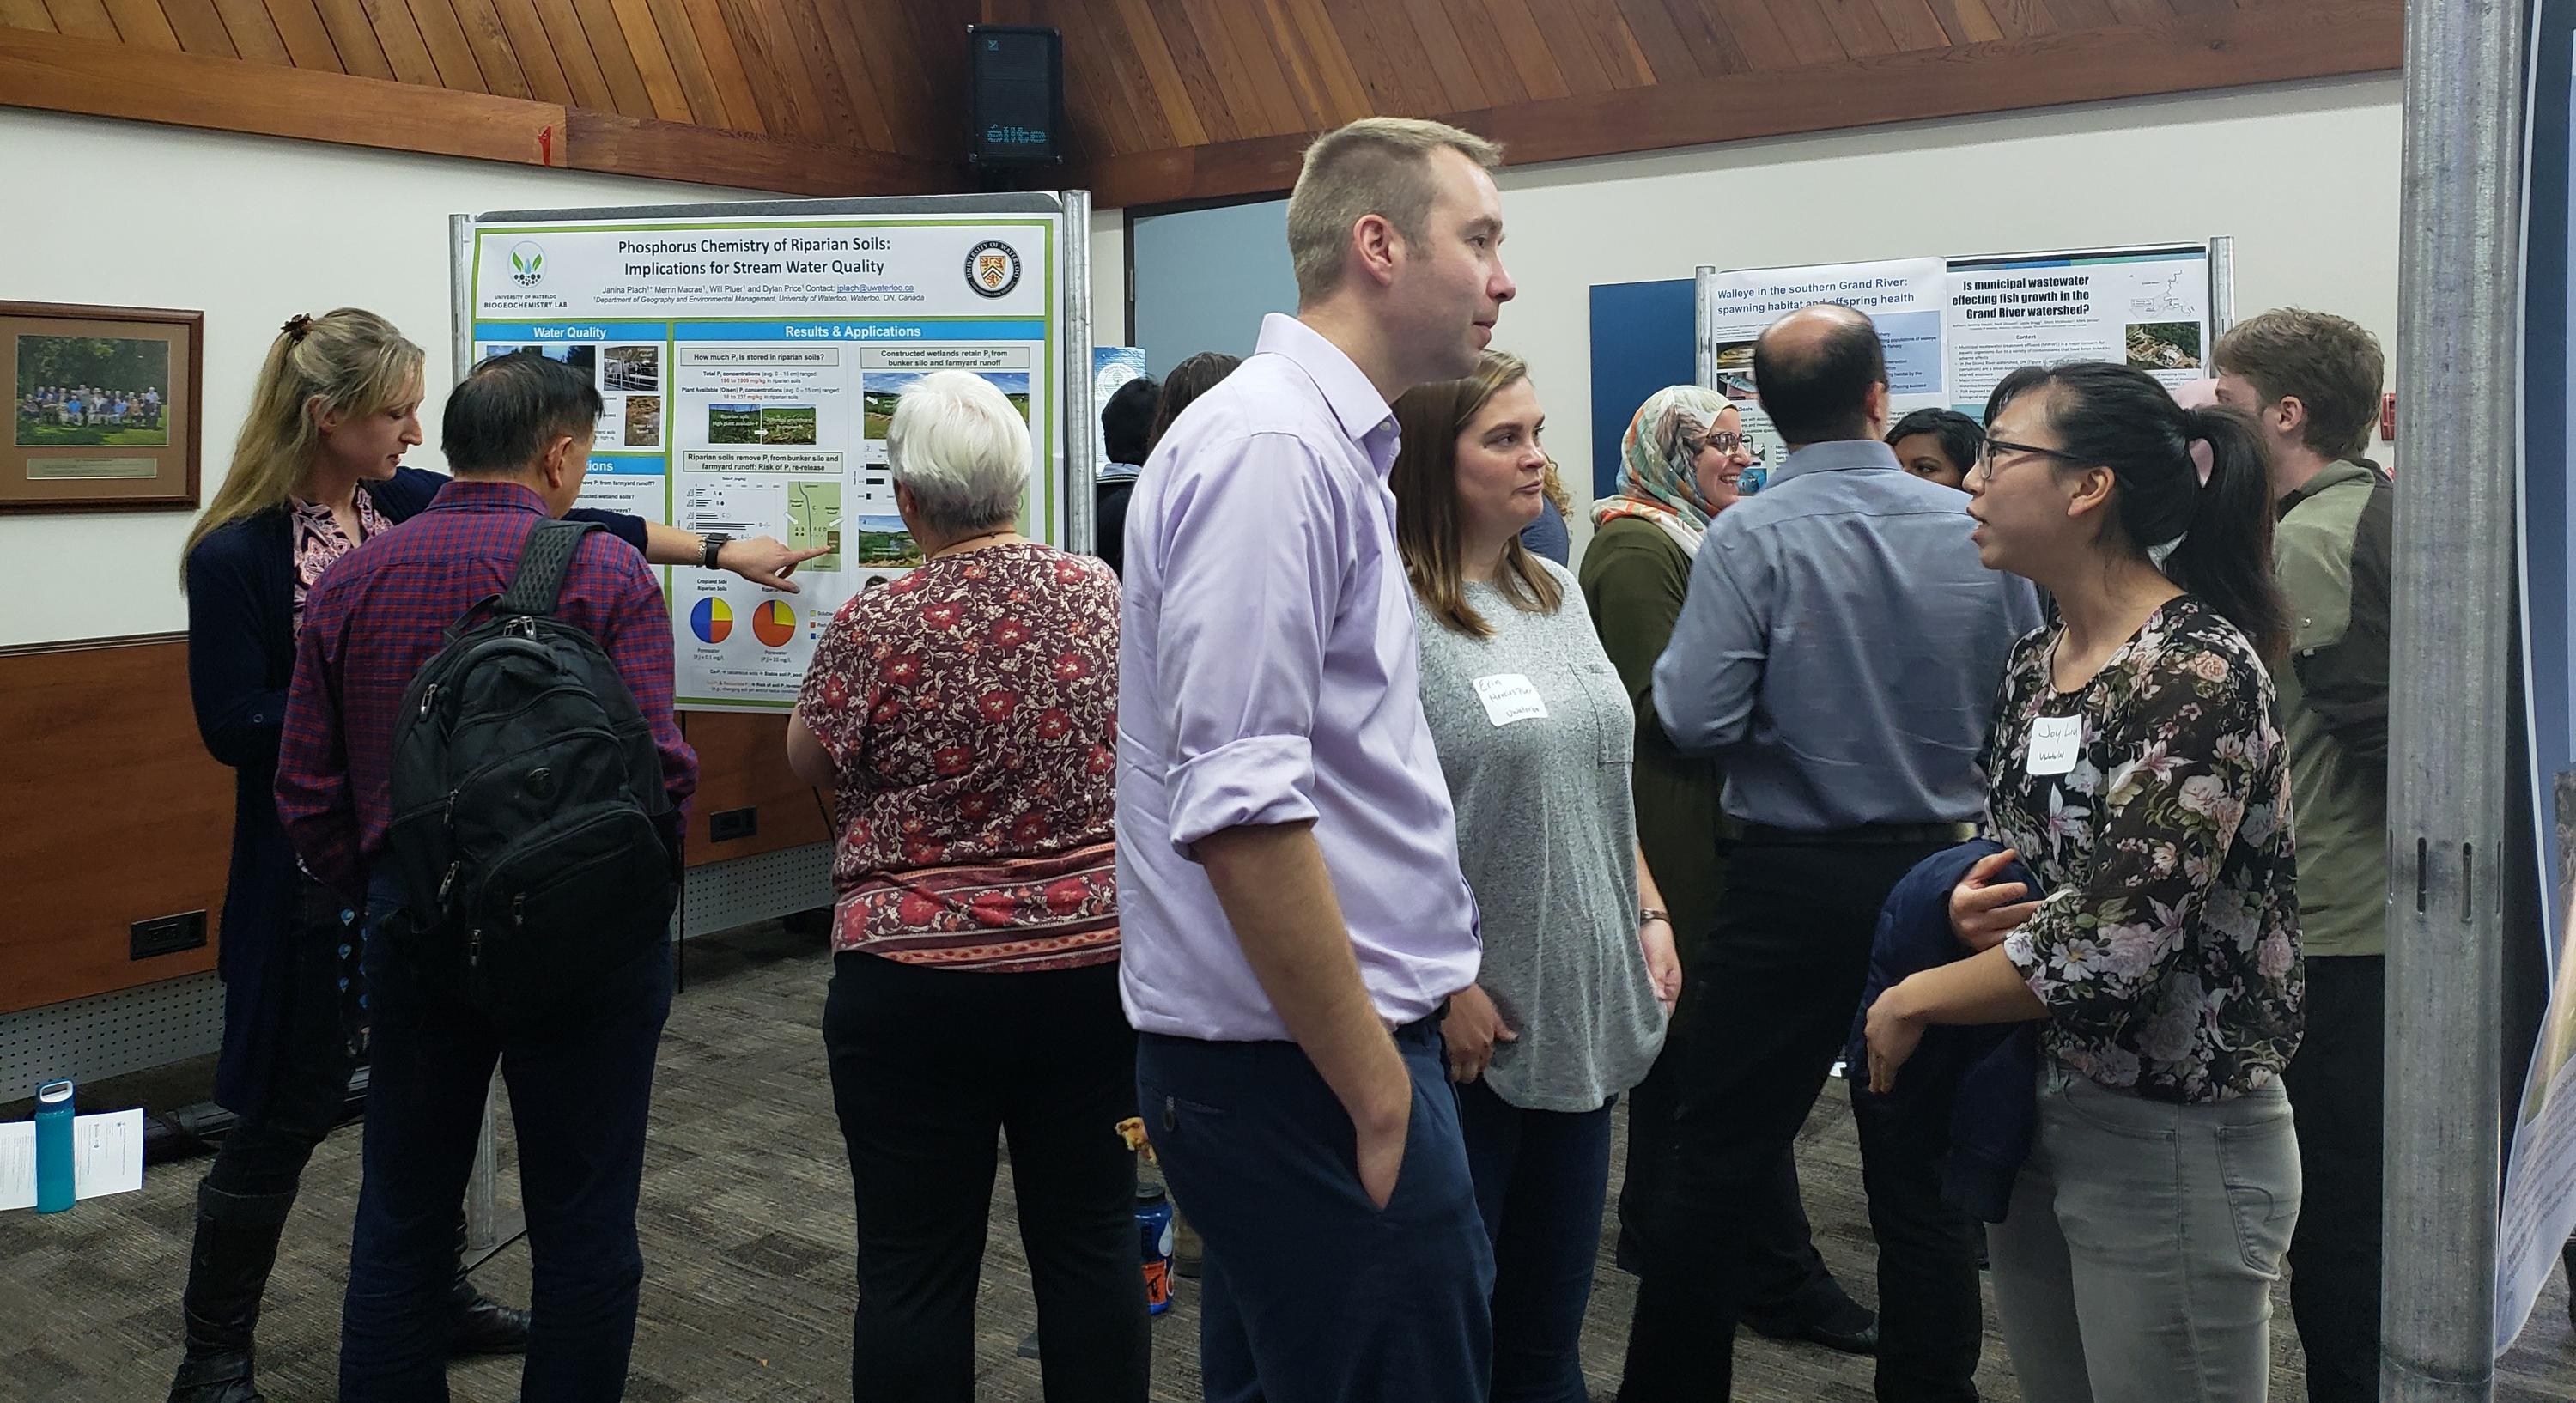 Poster session at UW Research Spotlight